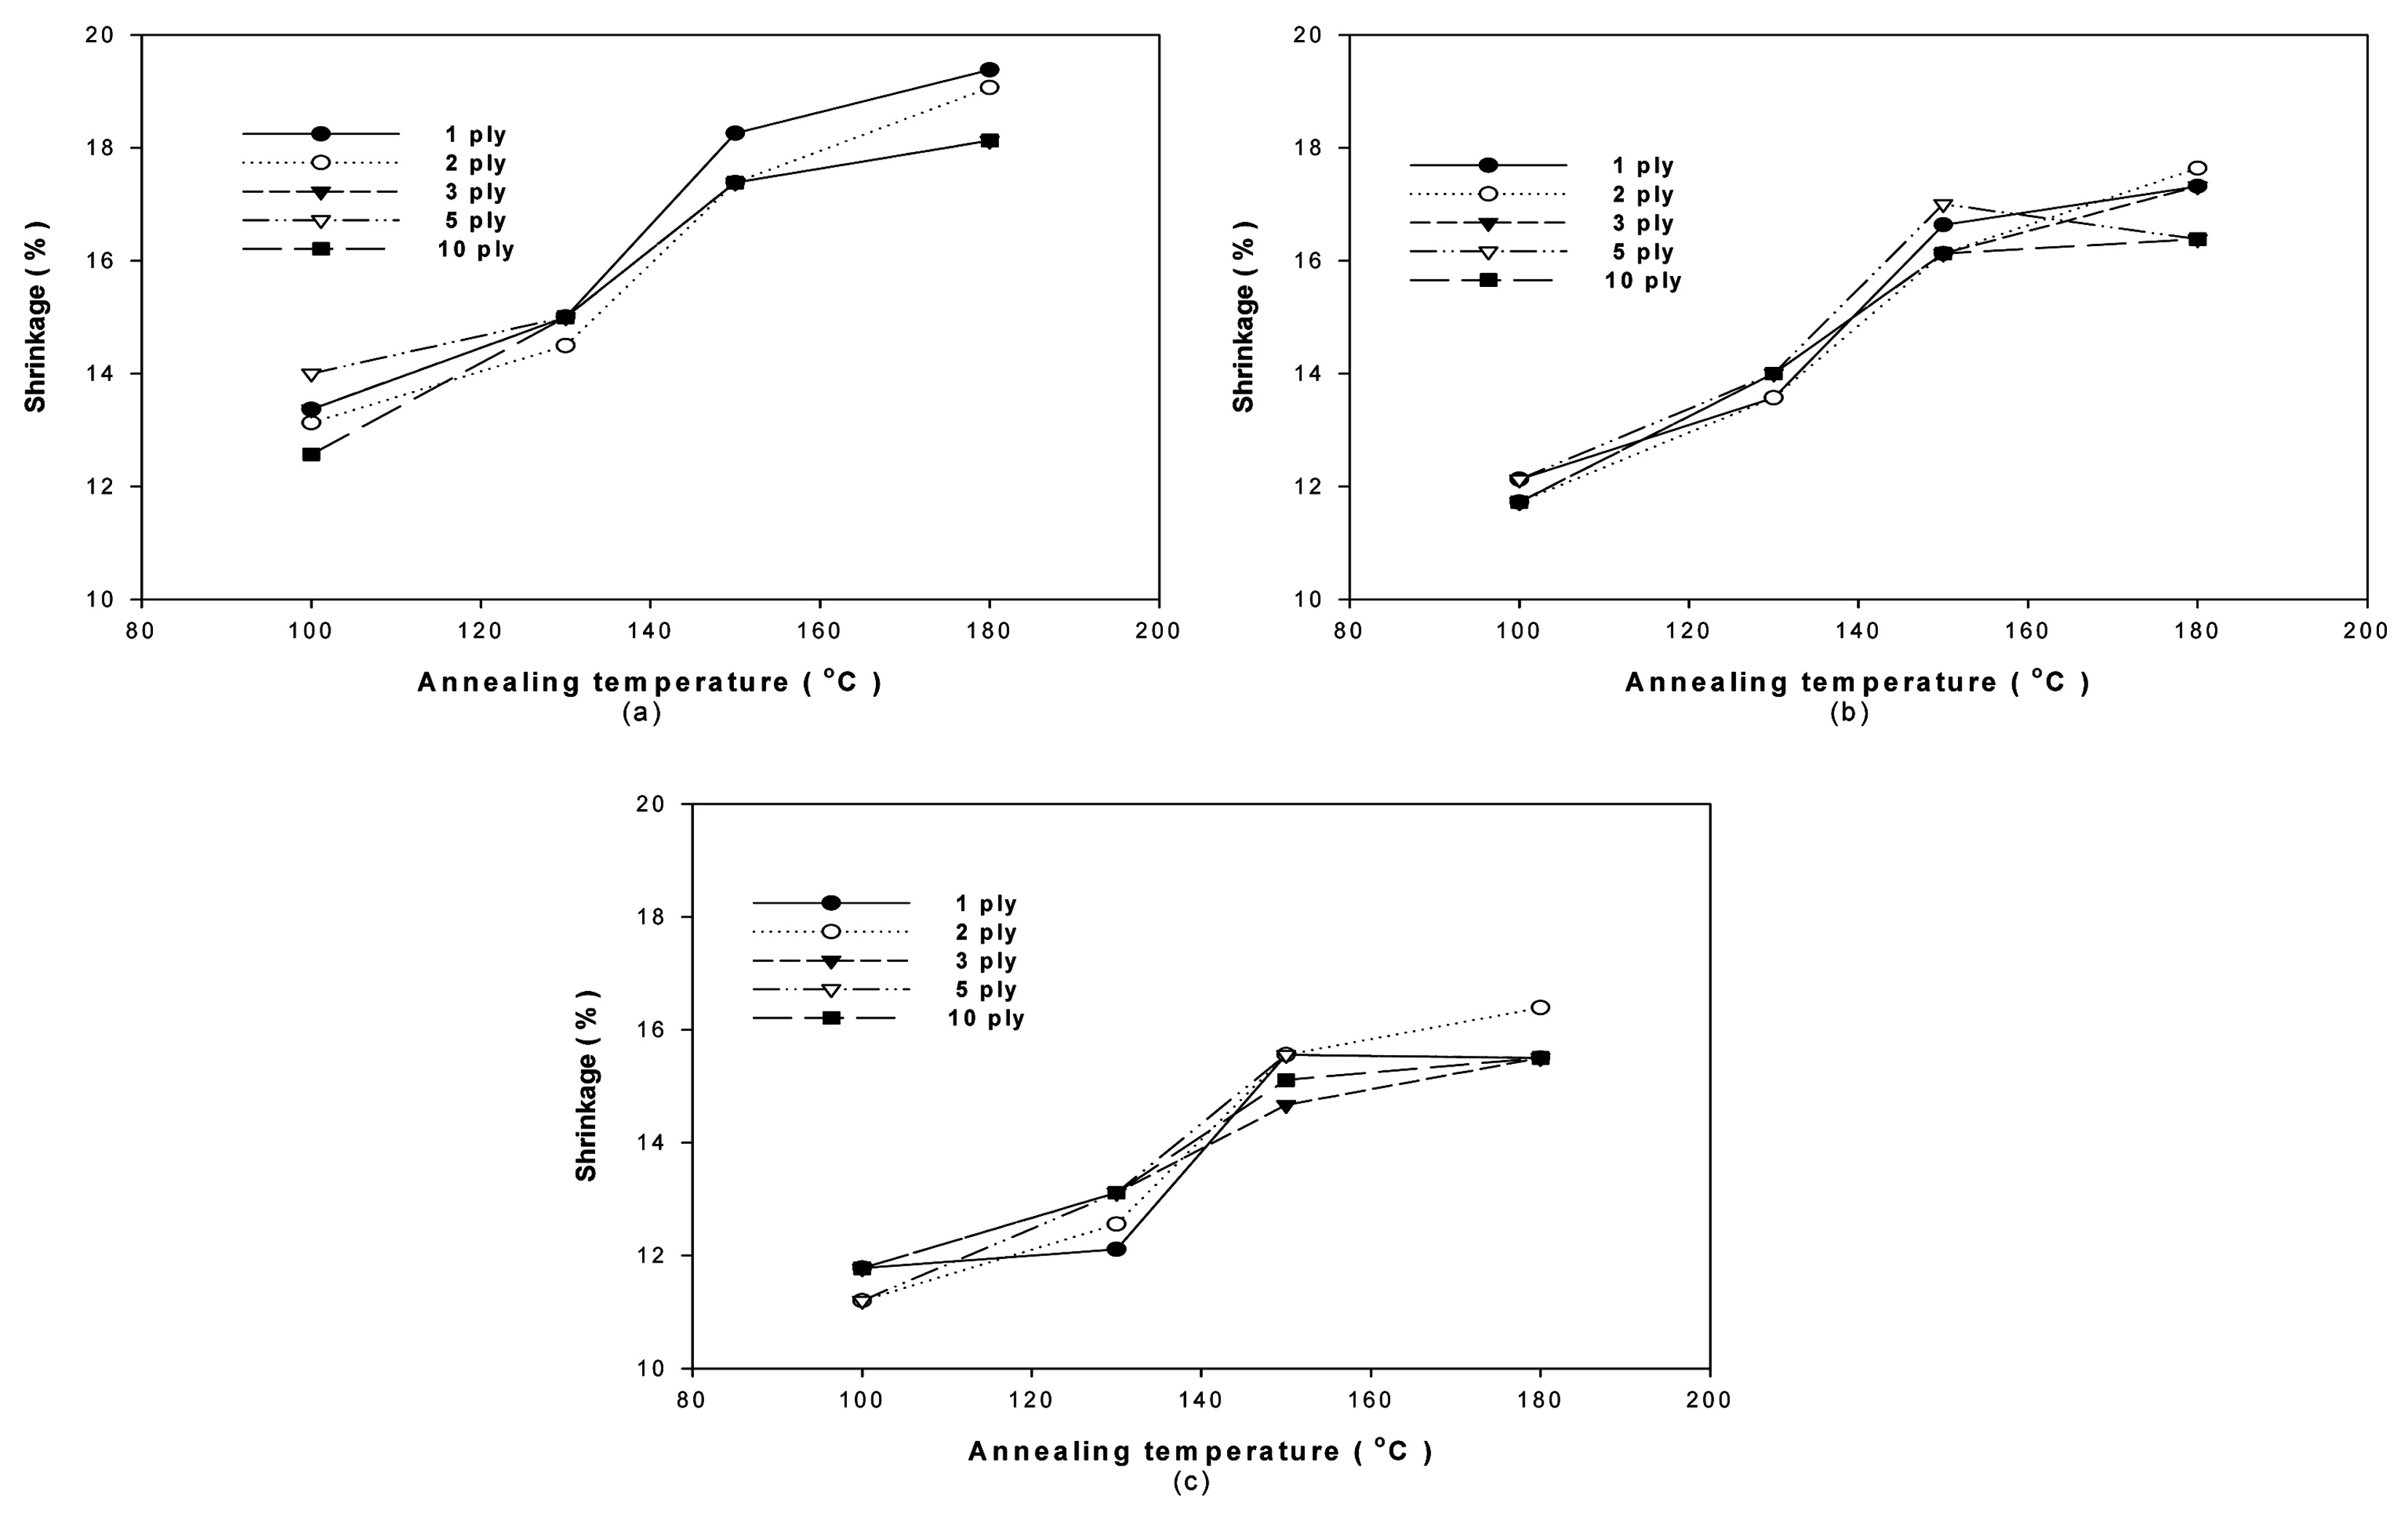 The relationship between the annealing temperature and the shrinkage of untwisted PTT yarns as a function of ply number; Loads; (a) 0.012
g/d (b) 0.024 g/d (c) 0.036 g/d.